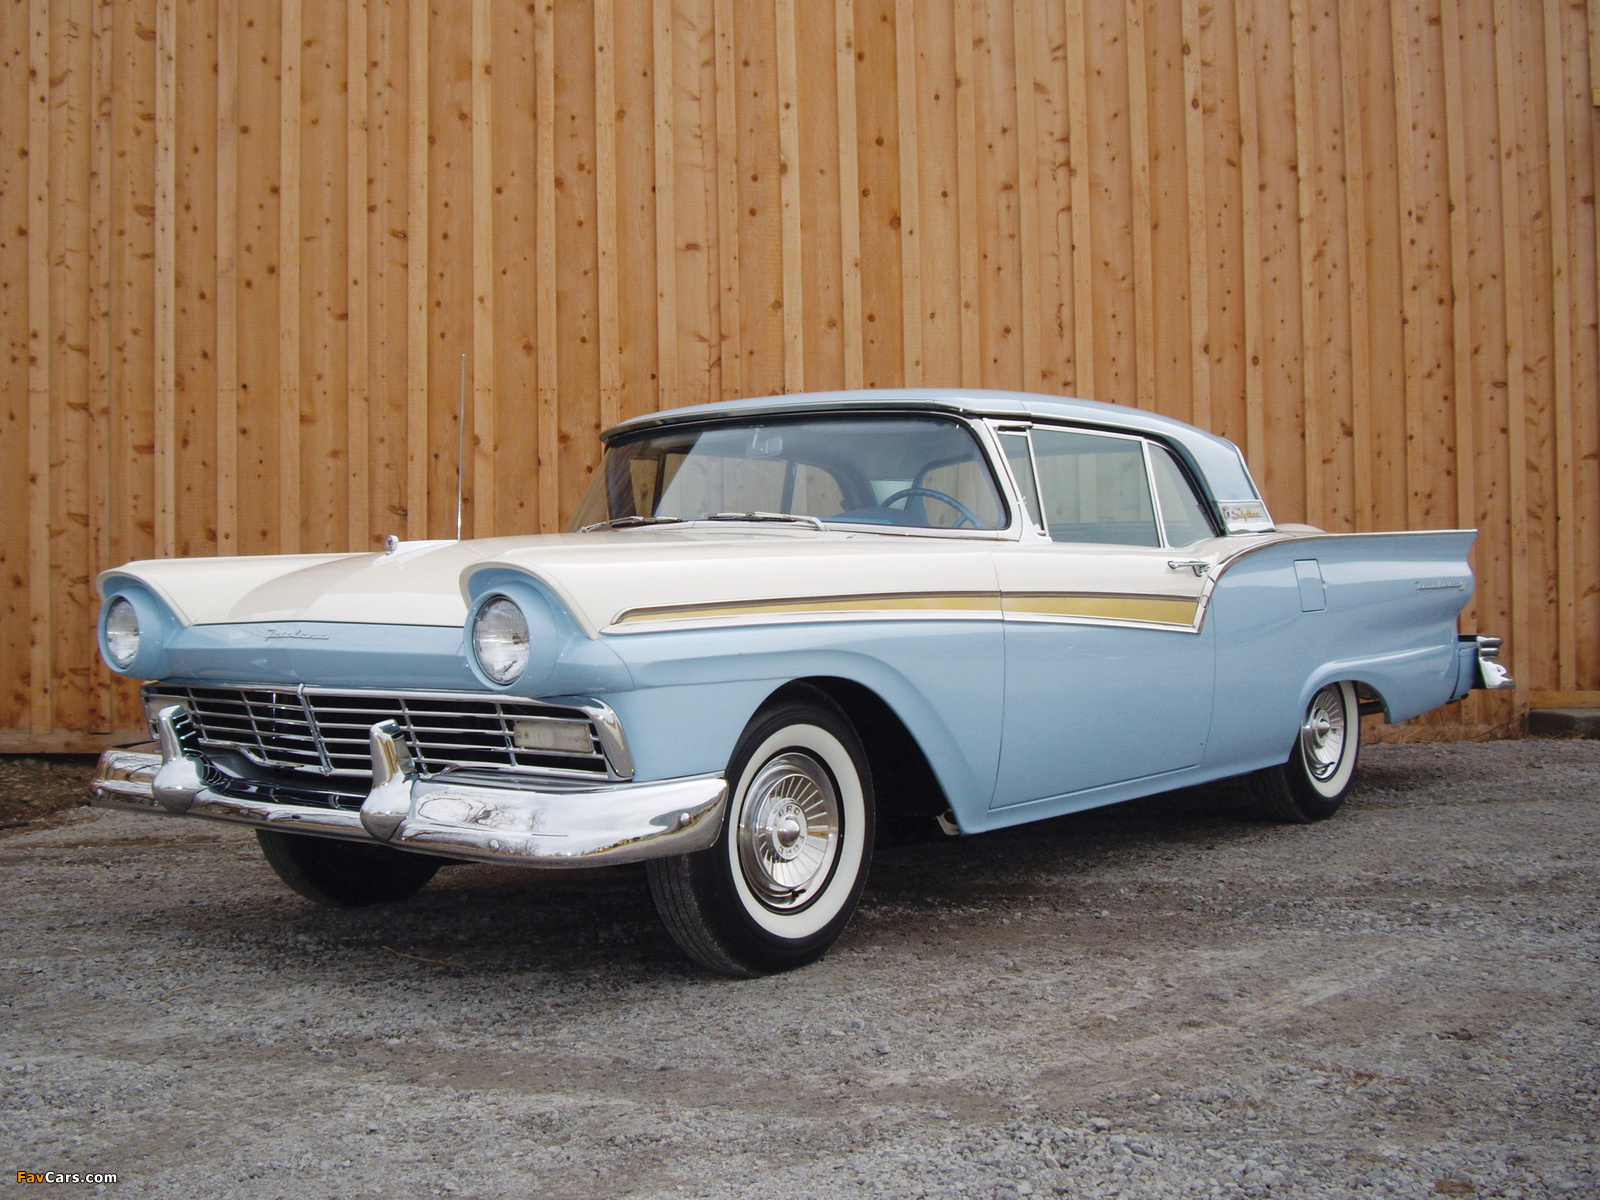 Images of Ford Fairlane 500 Skyliner Retractable Hardtop 1957 (1600 x 1200)